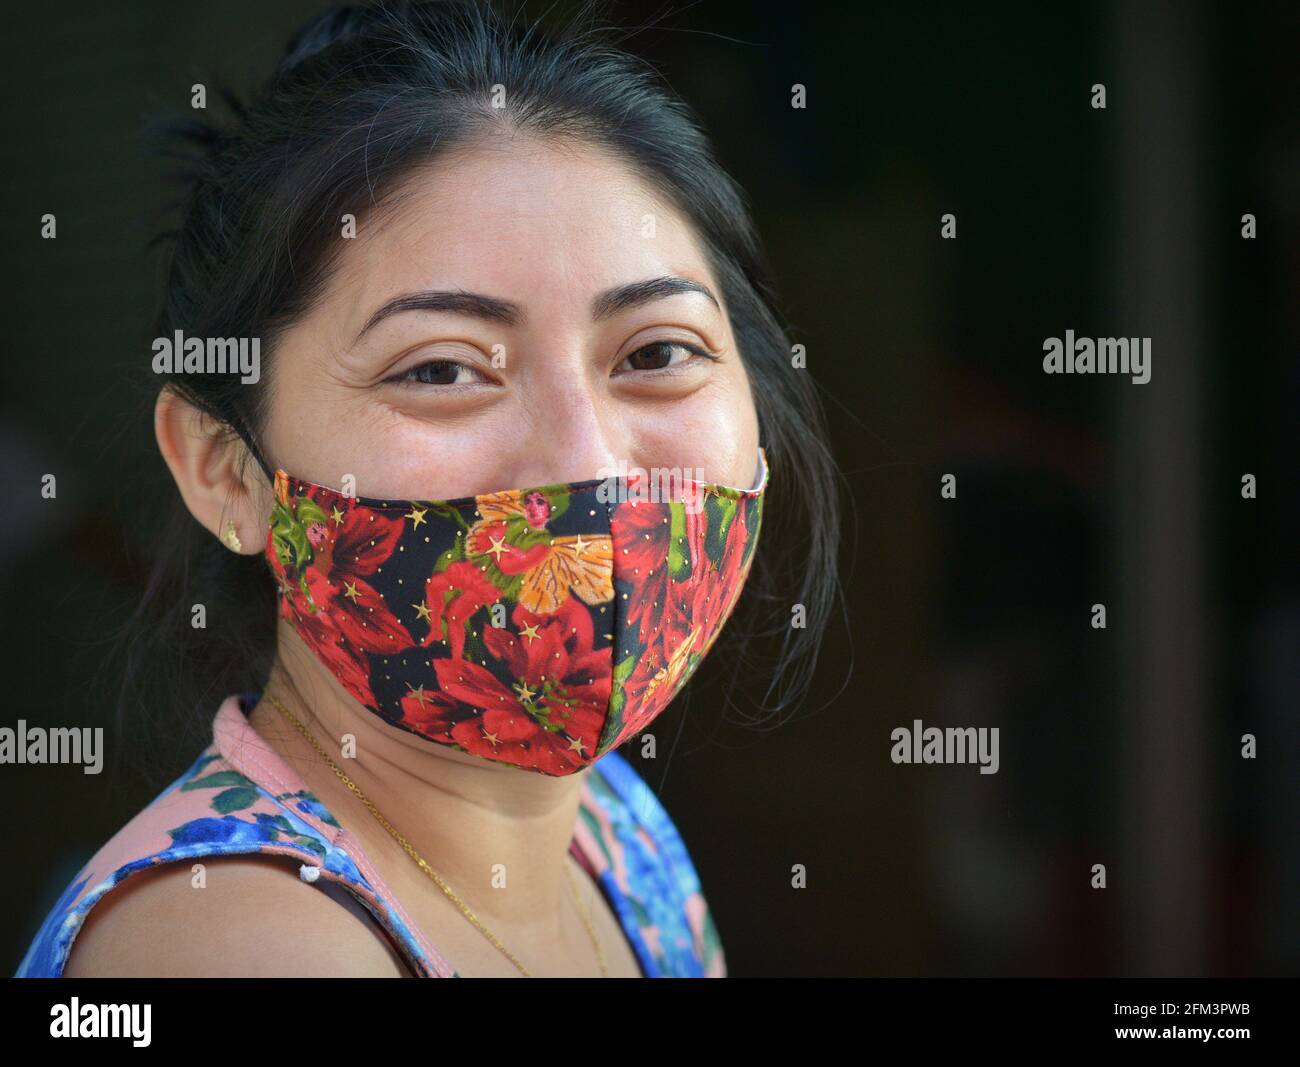 Charming positive young Mexican woman with smiling brown eyes wears a colorful non-medical fabric face mask during the coronavirus pandemic. Stock Photo